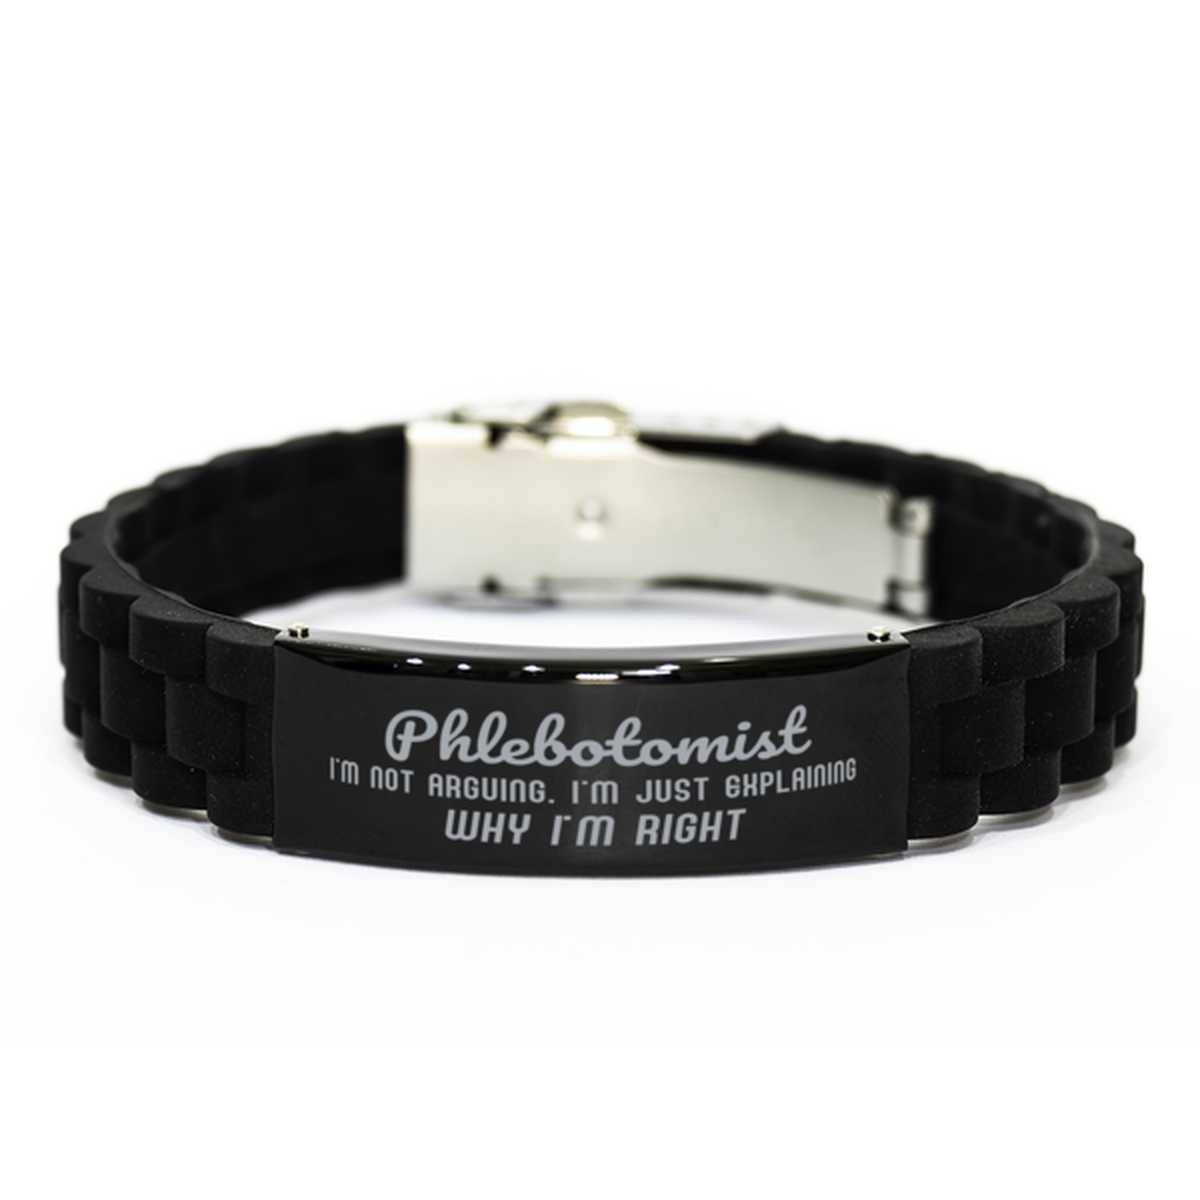 Phlebotomist I'm not Arguing. I'm Just Explaining Why I'm RIGHT Black Glidelock Clasp Bracelet, Funny Saying Quote Phlebotomist Gifts For Phlebotomist Graduation Birthday Christmas Gifts for Men Women Coworker